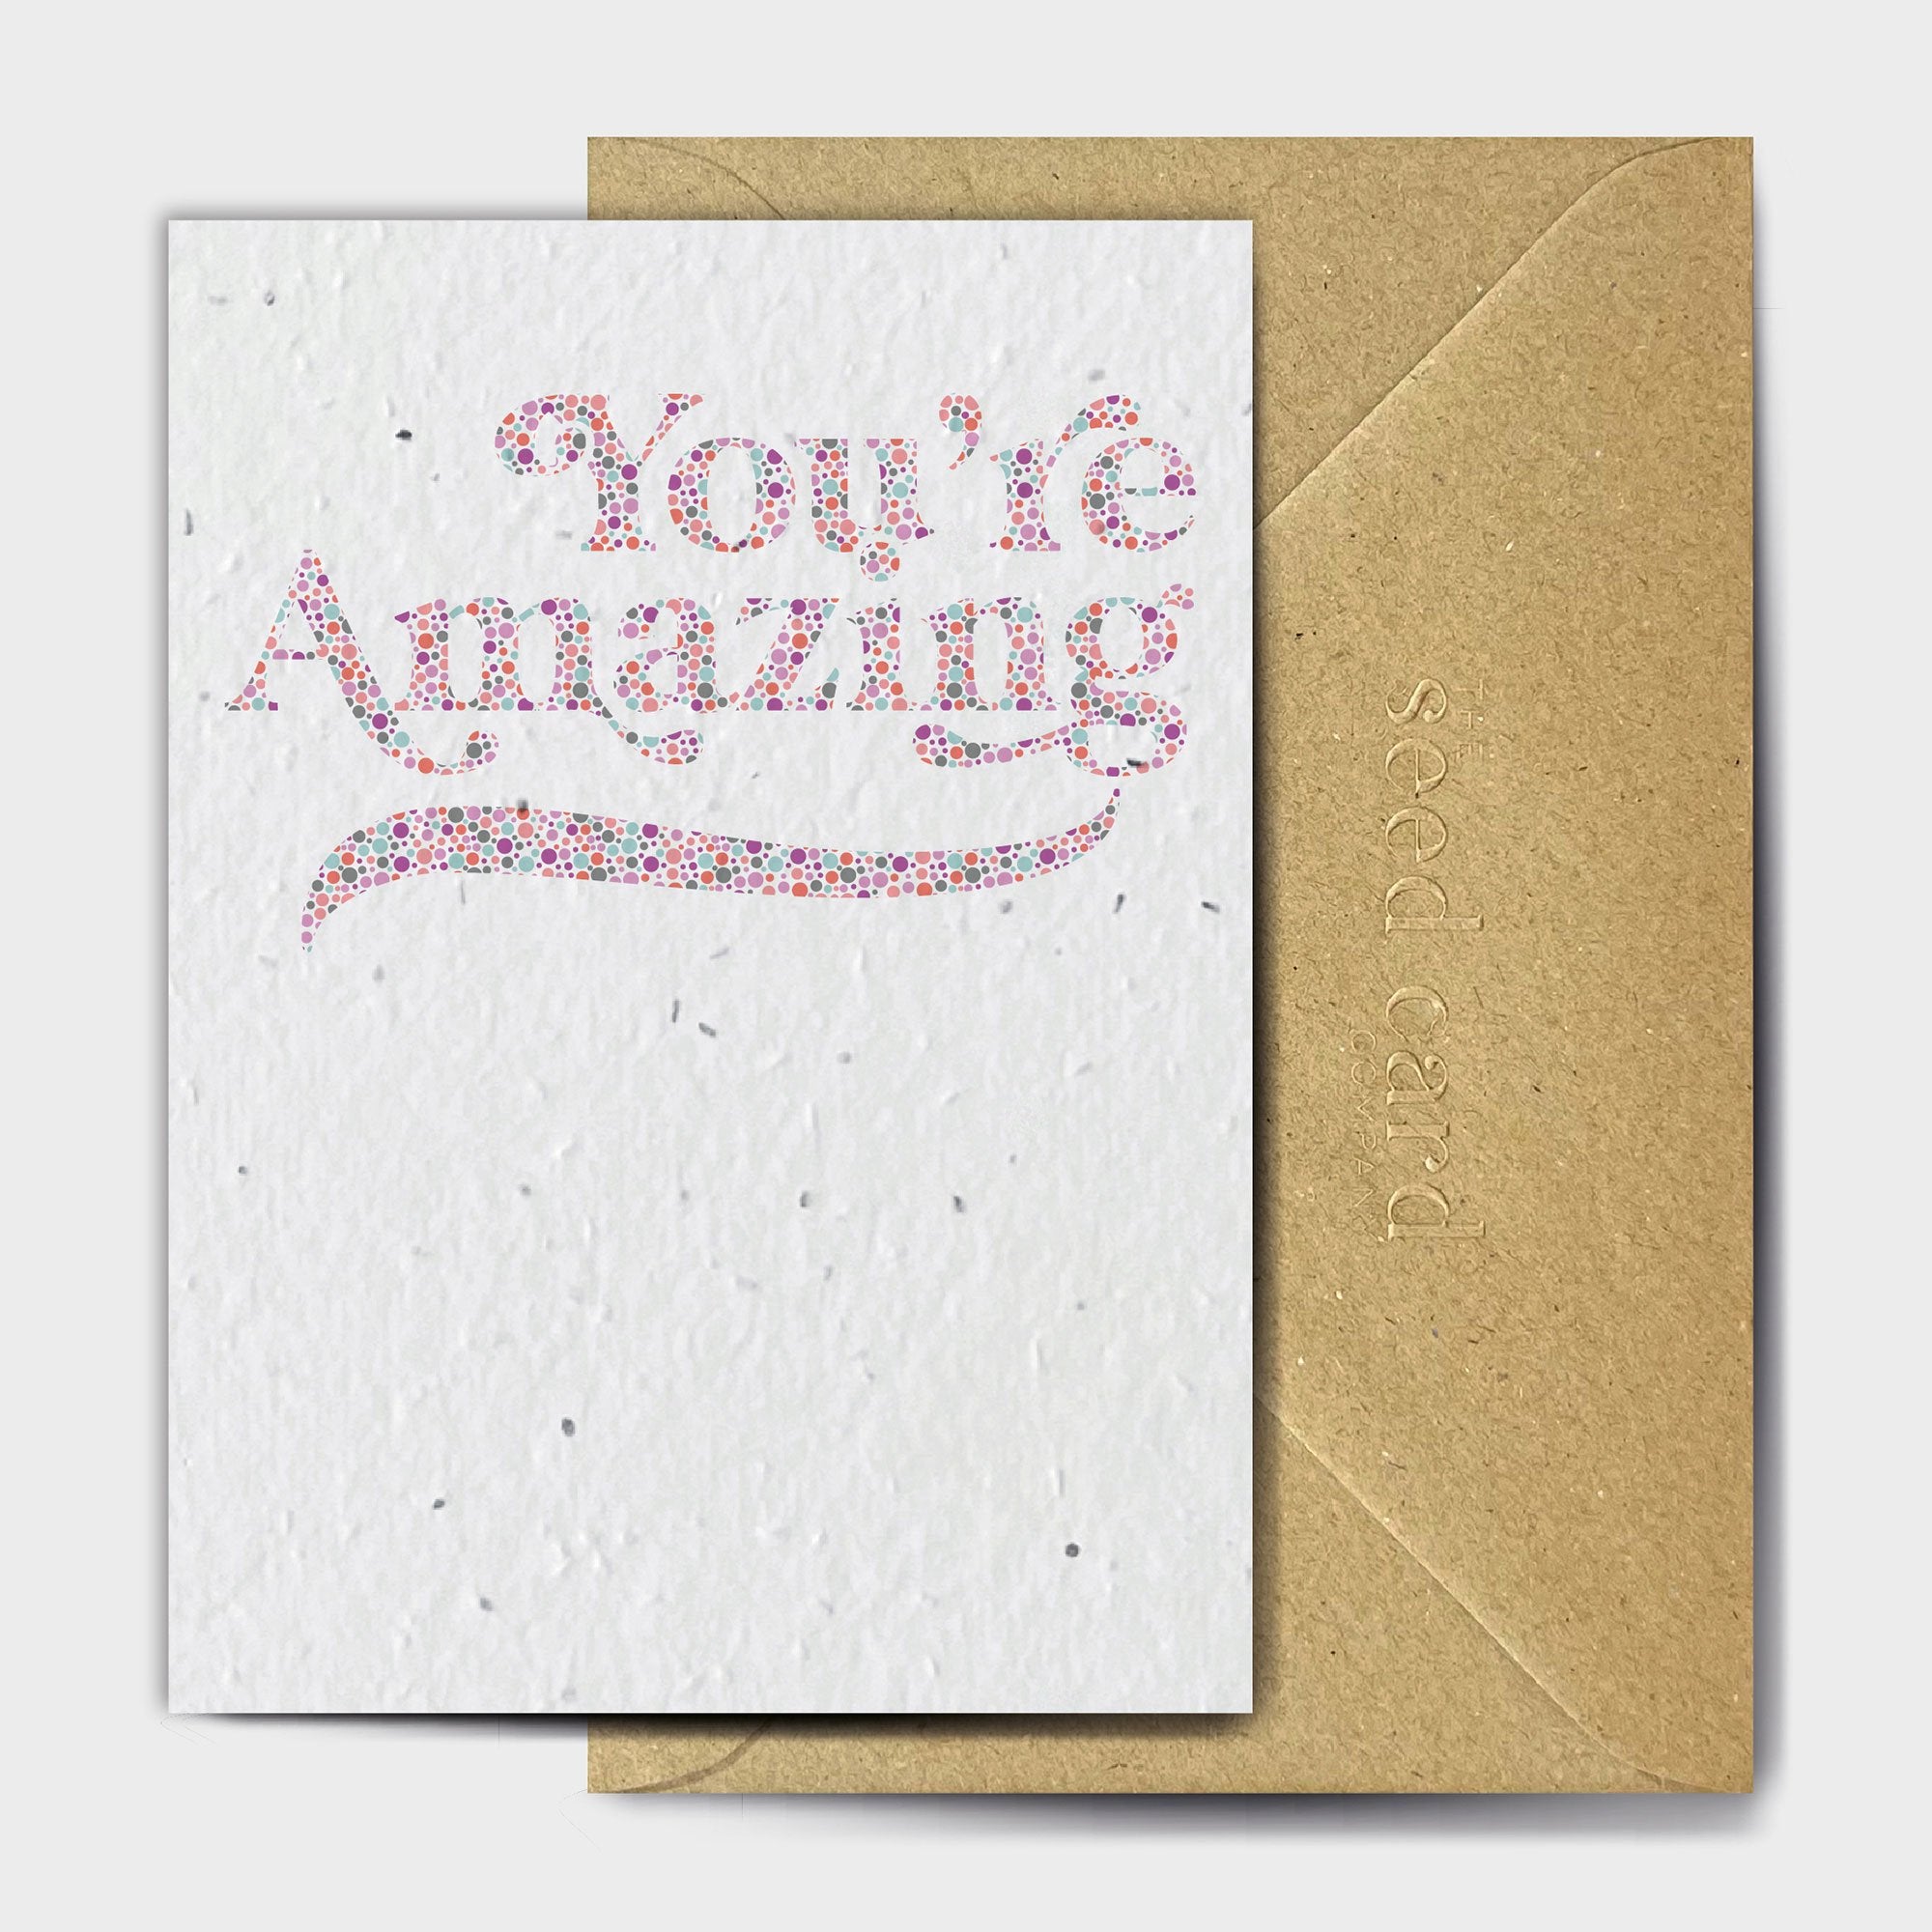 Shop online You're Dotty Amazing - 100% biodegradable seed-embedded cards Shop -The Seed Card Company